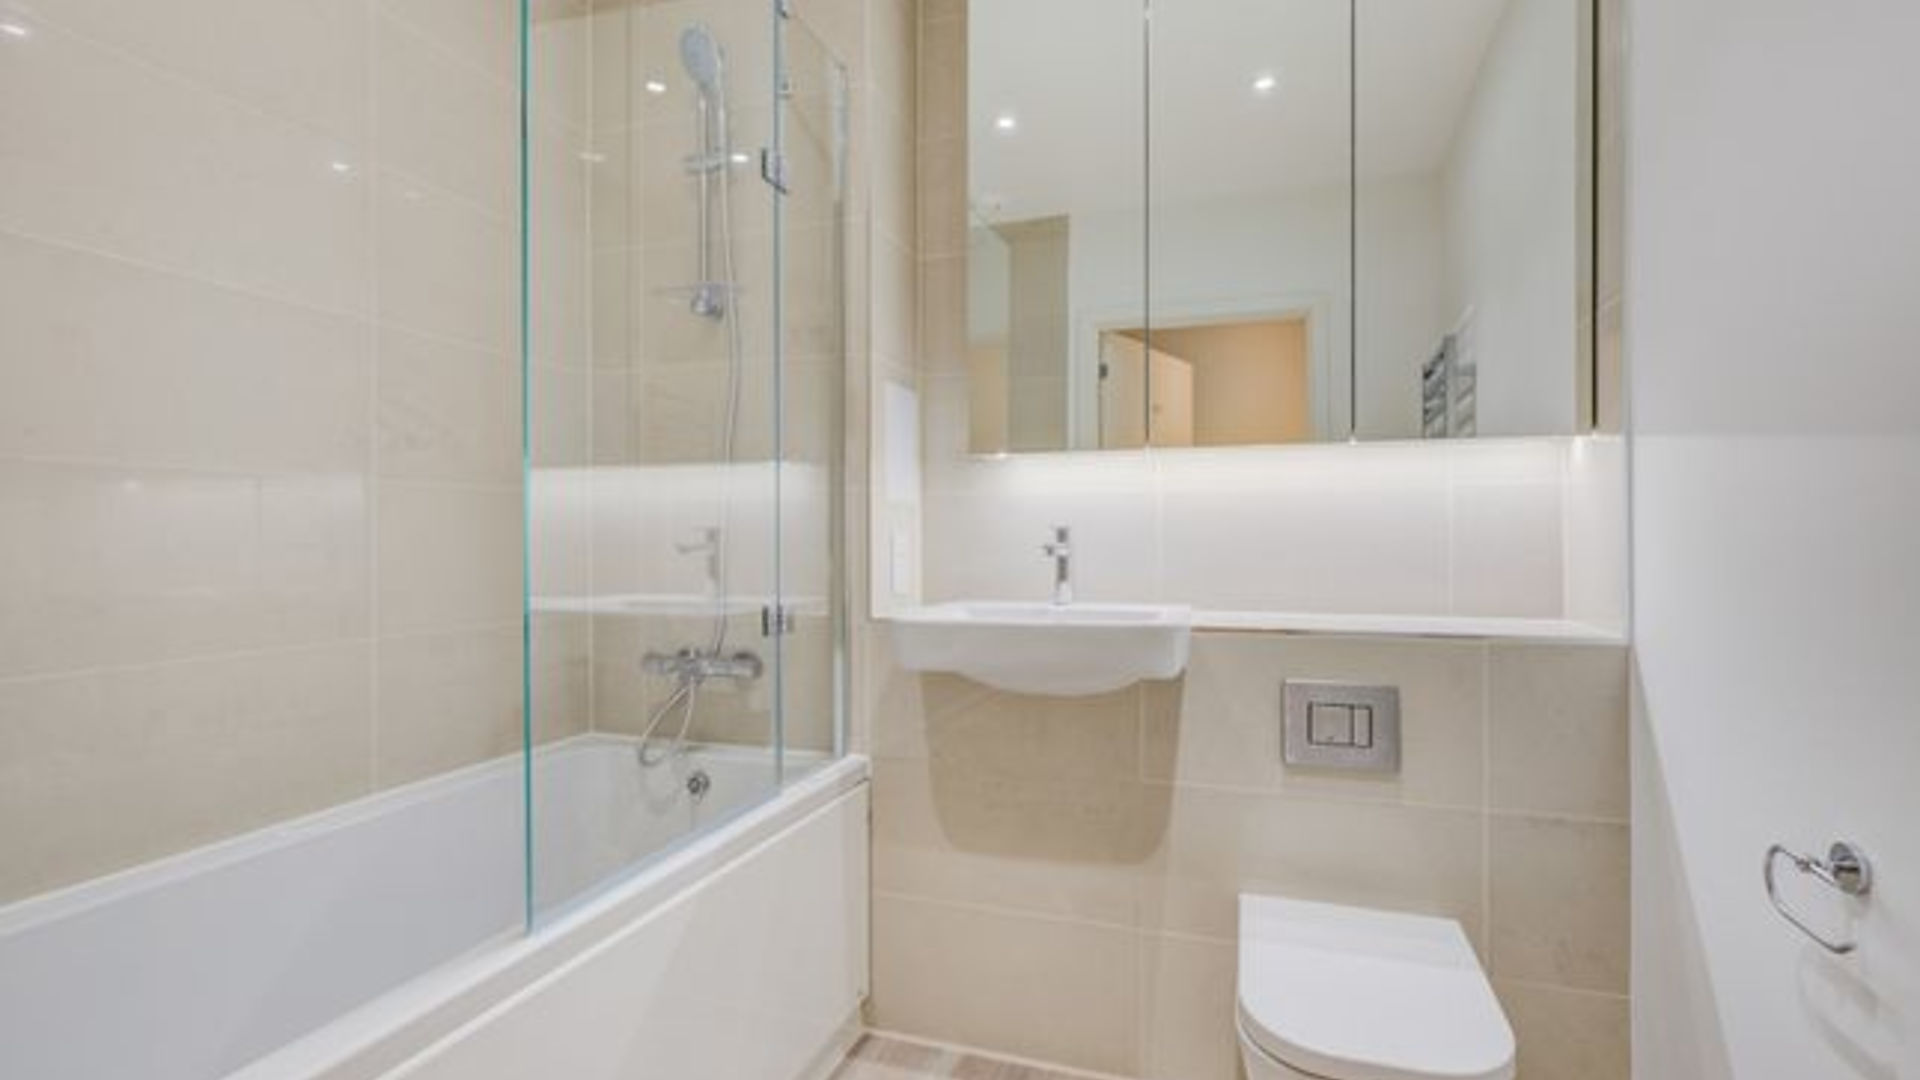 Apartments to Rent by Hera at Hornchurch, Havering, RM11, bathroom